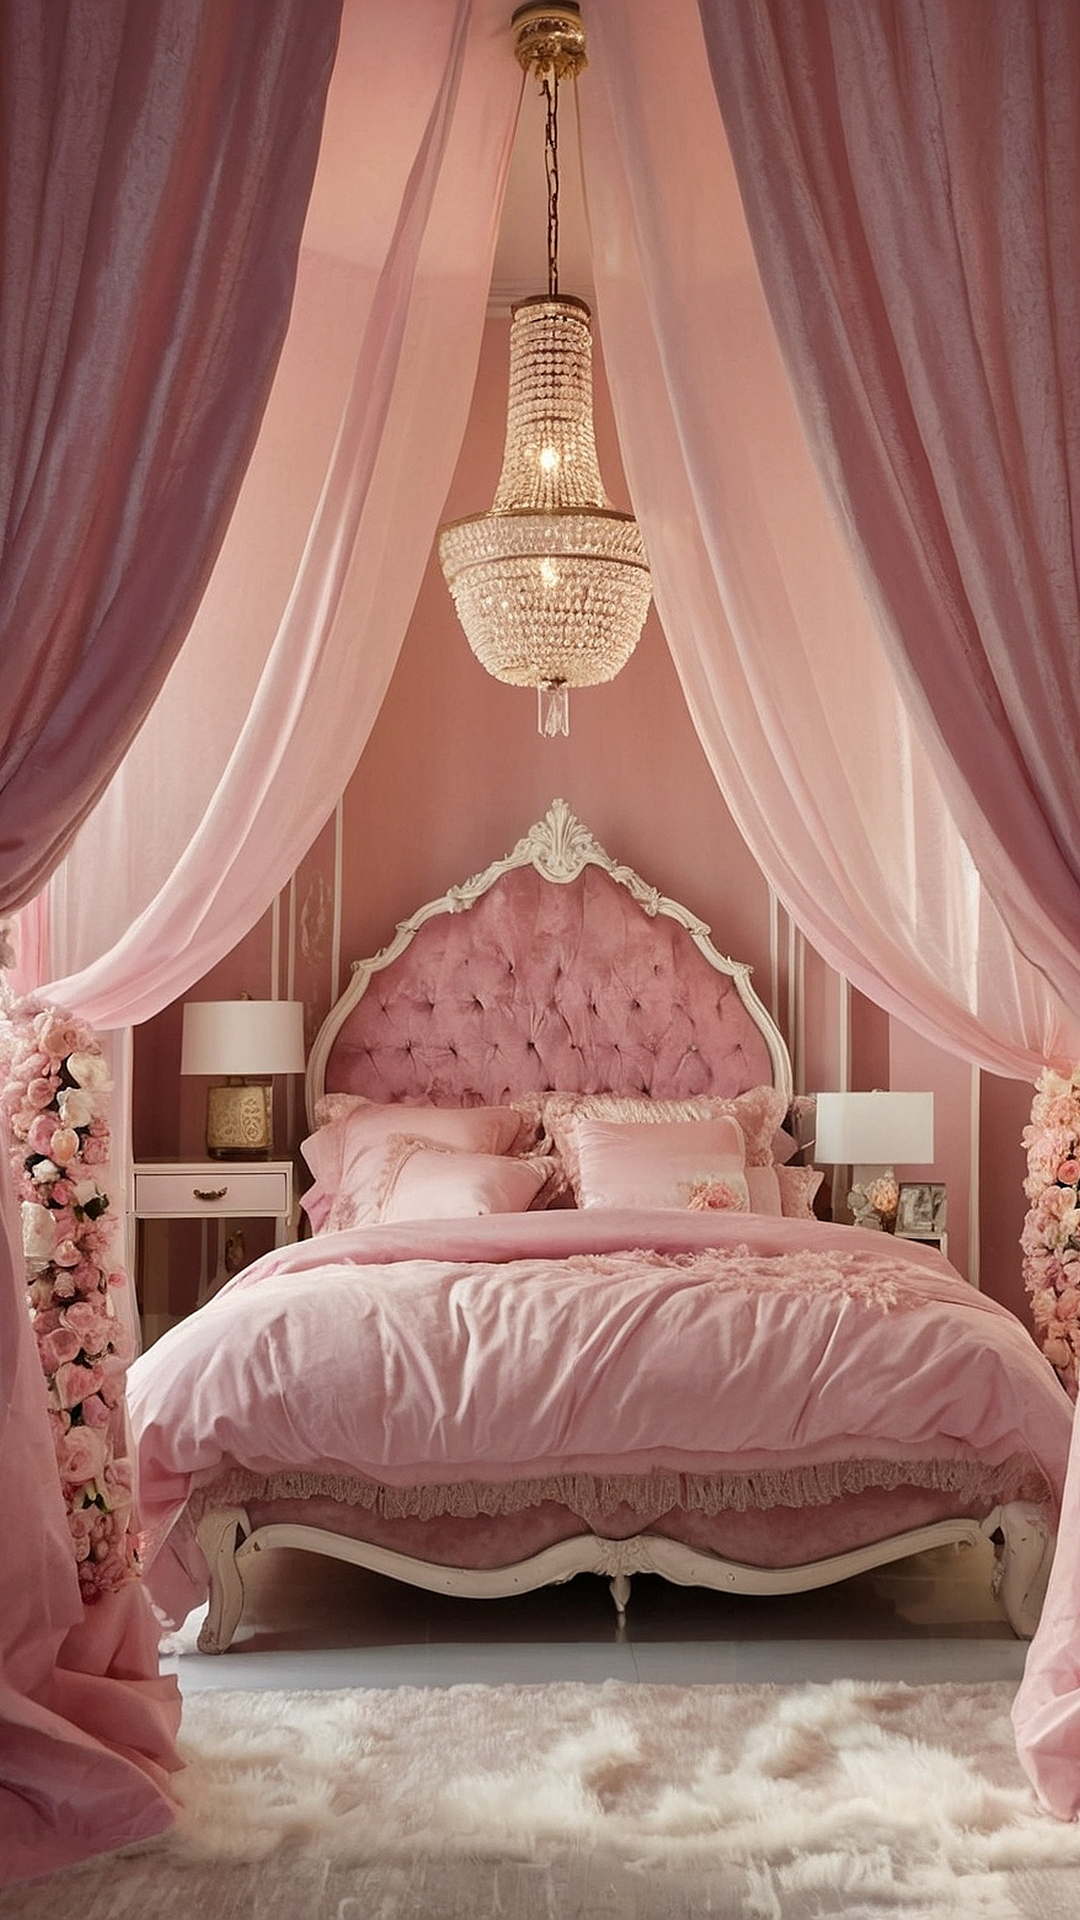 <p>As you step into your bedroom, a world of whimsy unfolds before your eyes - soft pink hues dance across the walls like a gentle spring breeze. Imagine curling up on a plush velvet chair in the corner, surrounded by delicate floral accents and twinkling fairy lights that cast a warm, magical glow. The air is filled with the sweet scent of blooming peonies, transporting you to a place of serenity and comfort.</p><p>Now, envision your bed transformed into a sanctuary of plush pillows and luxurious textures, inviting you to sink into a sea of softness after a long day. The curtains flutter gently in the breeze, revealing a view of the moonlit sky outside. In this pink haven, every detail is meticulously curated to bring a sense of joy and playfulness to your space. Let your imagination run wild as you embrace the whimsical charm of this enchanted retreat that feels like a dream come true.</p><figure class=